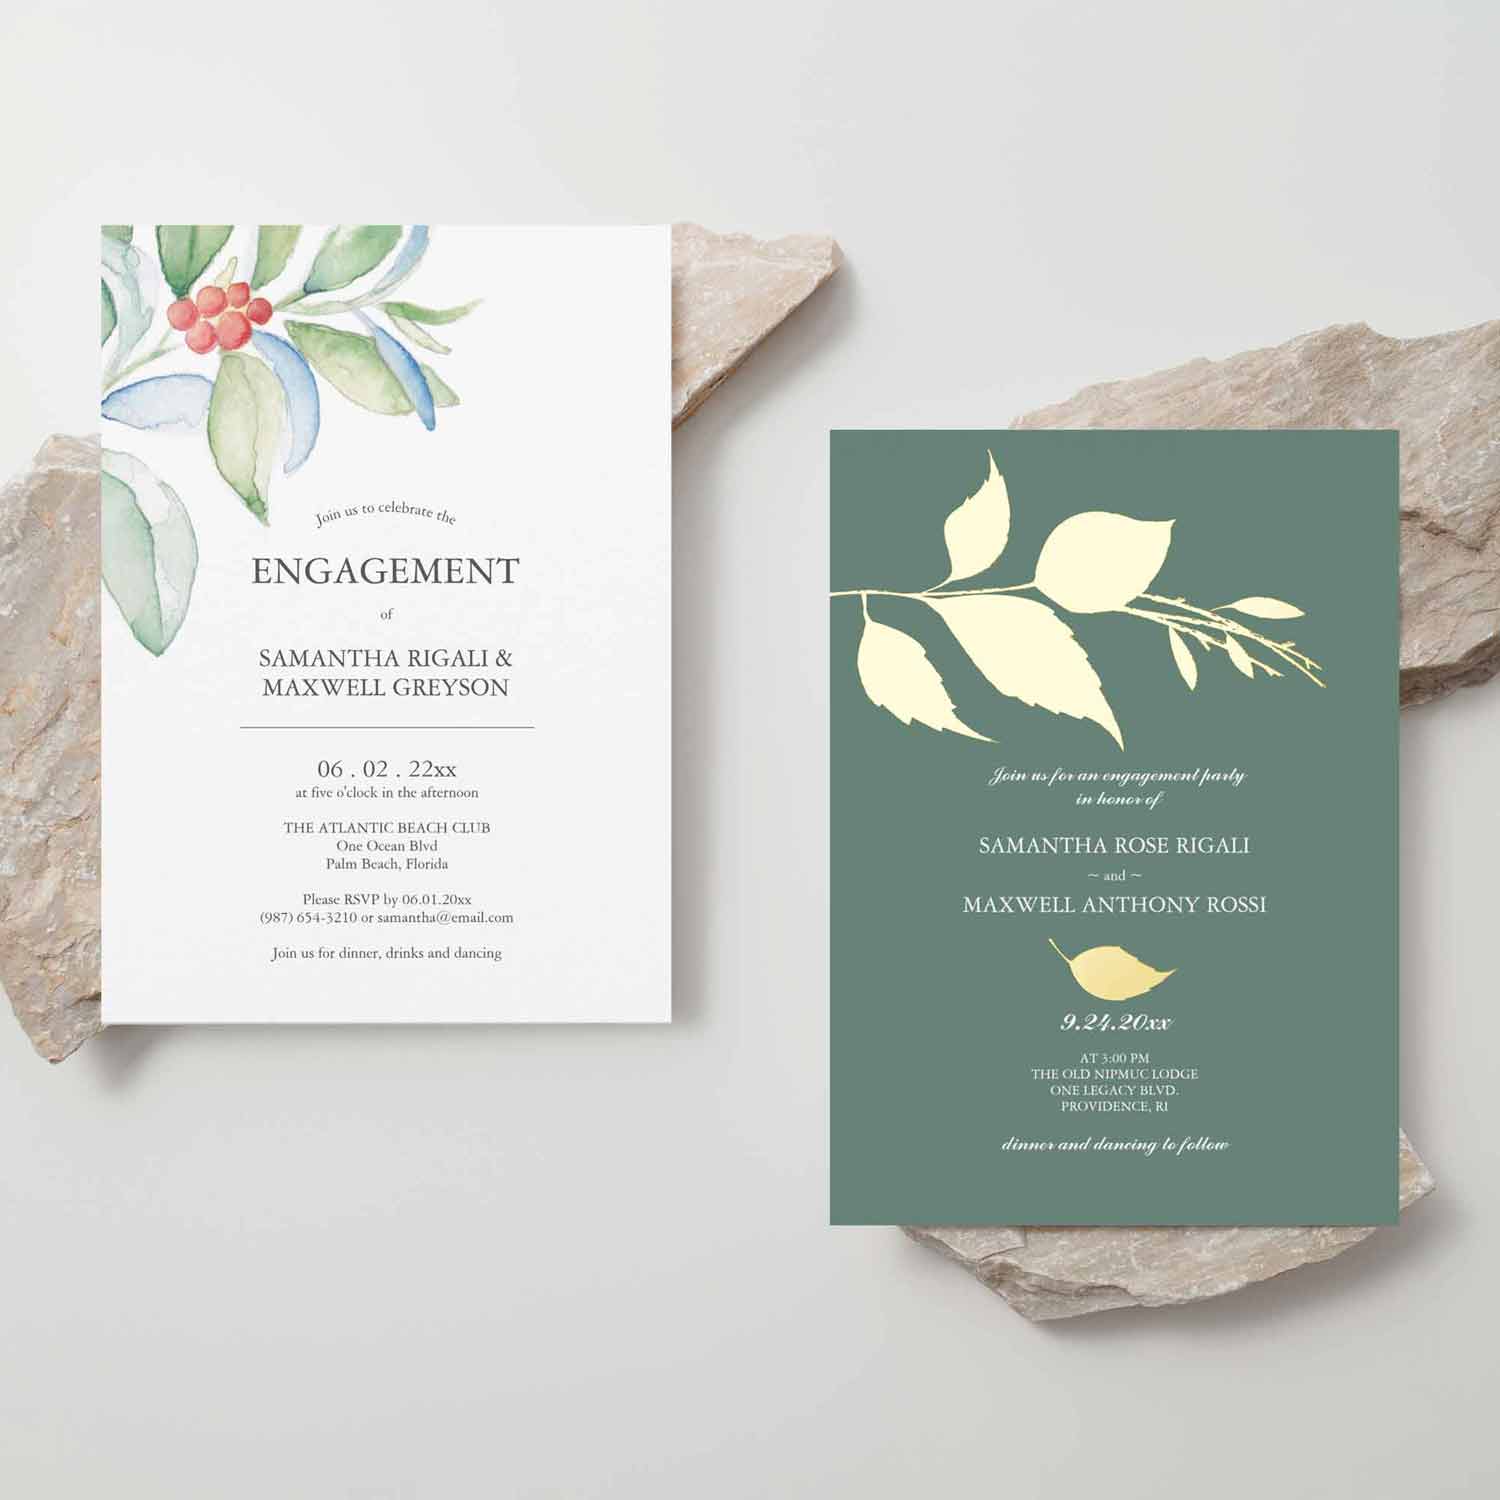 Engagement party invitations. Click the image to see the full assortment.